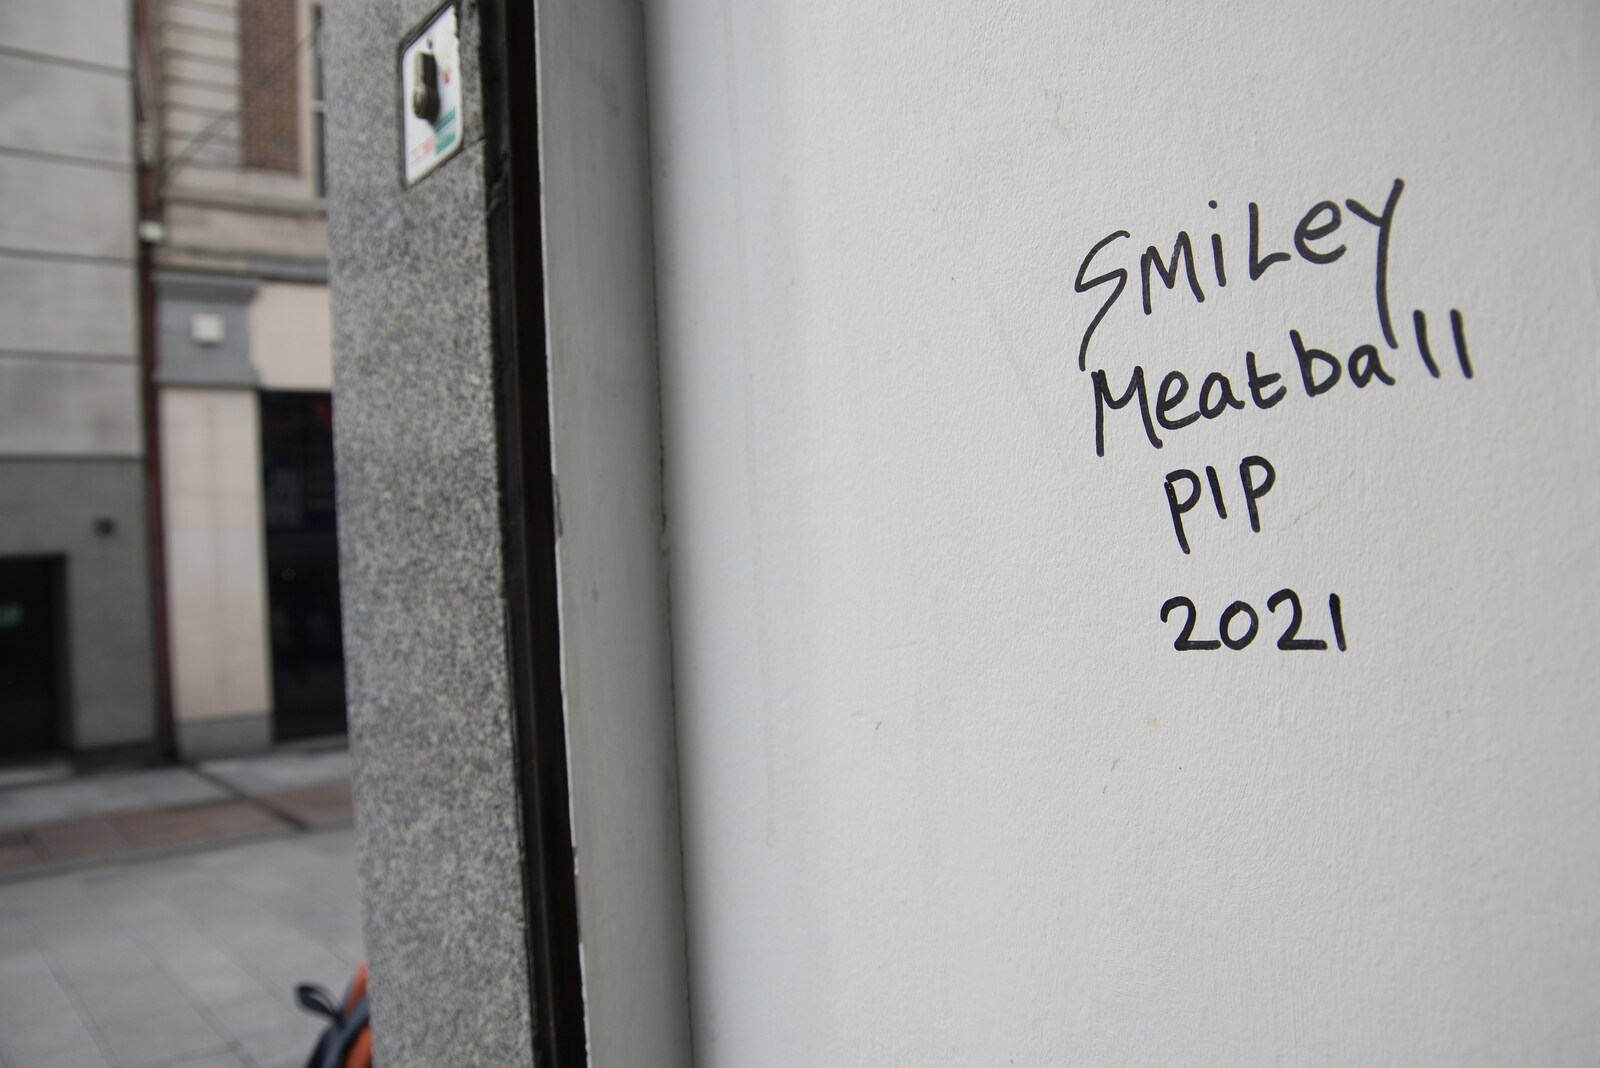 Smiley Meatball Pip, apparently from A Trip to Noddy's, and Dublin City Centre, Wicklow and Dublin, Ireland - 16th August 2021